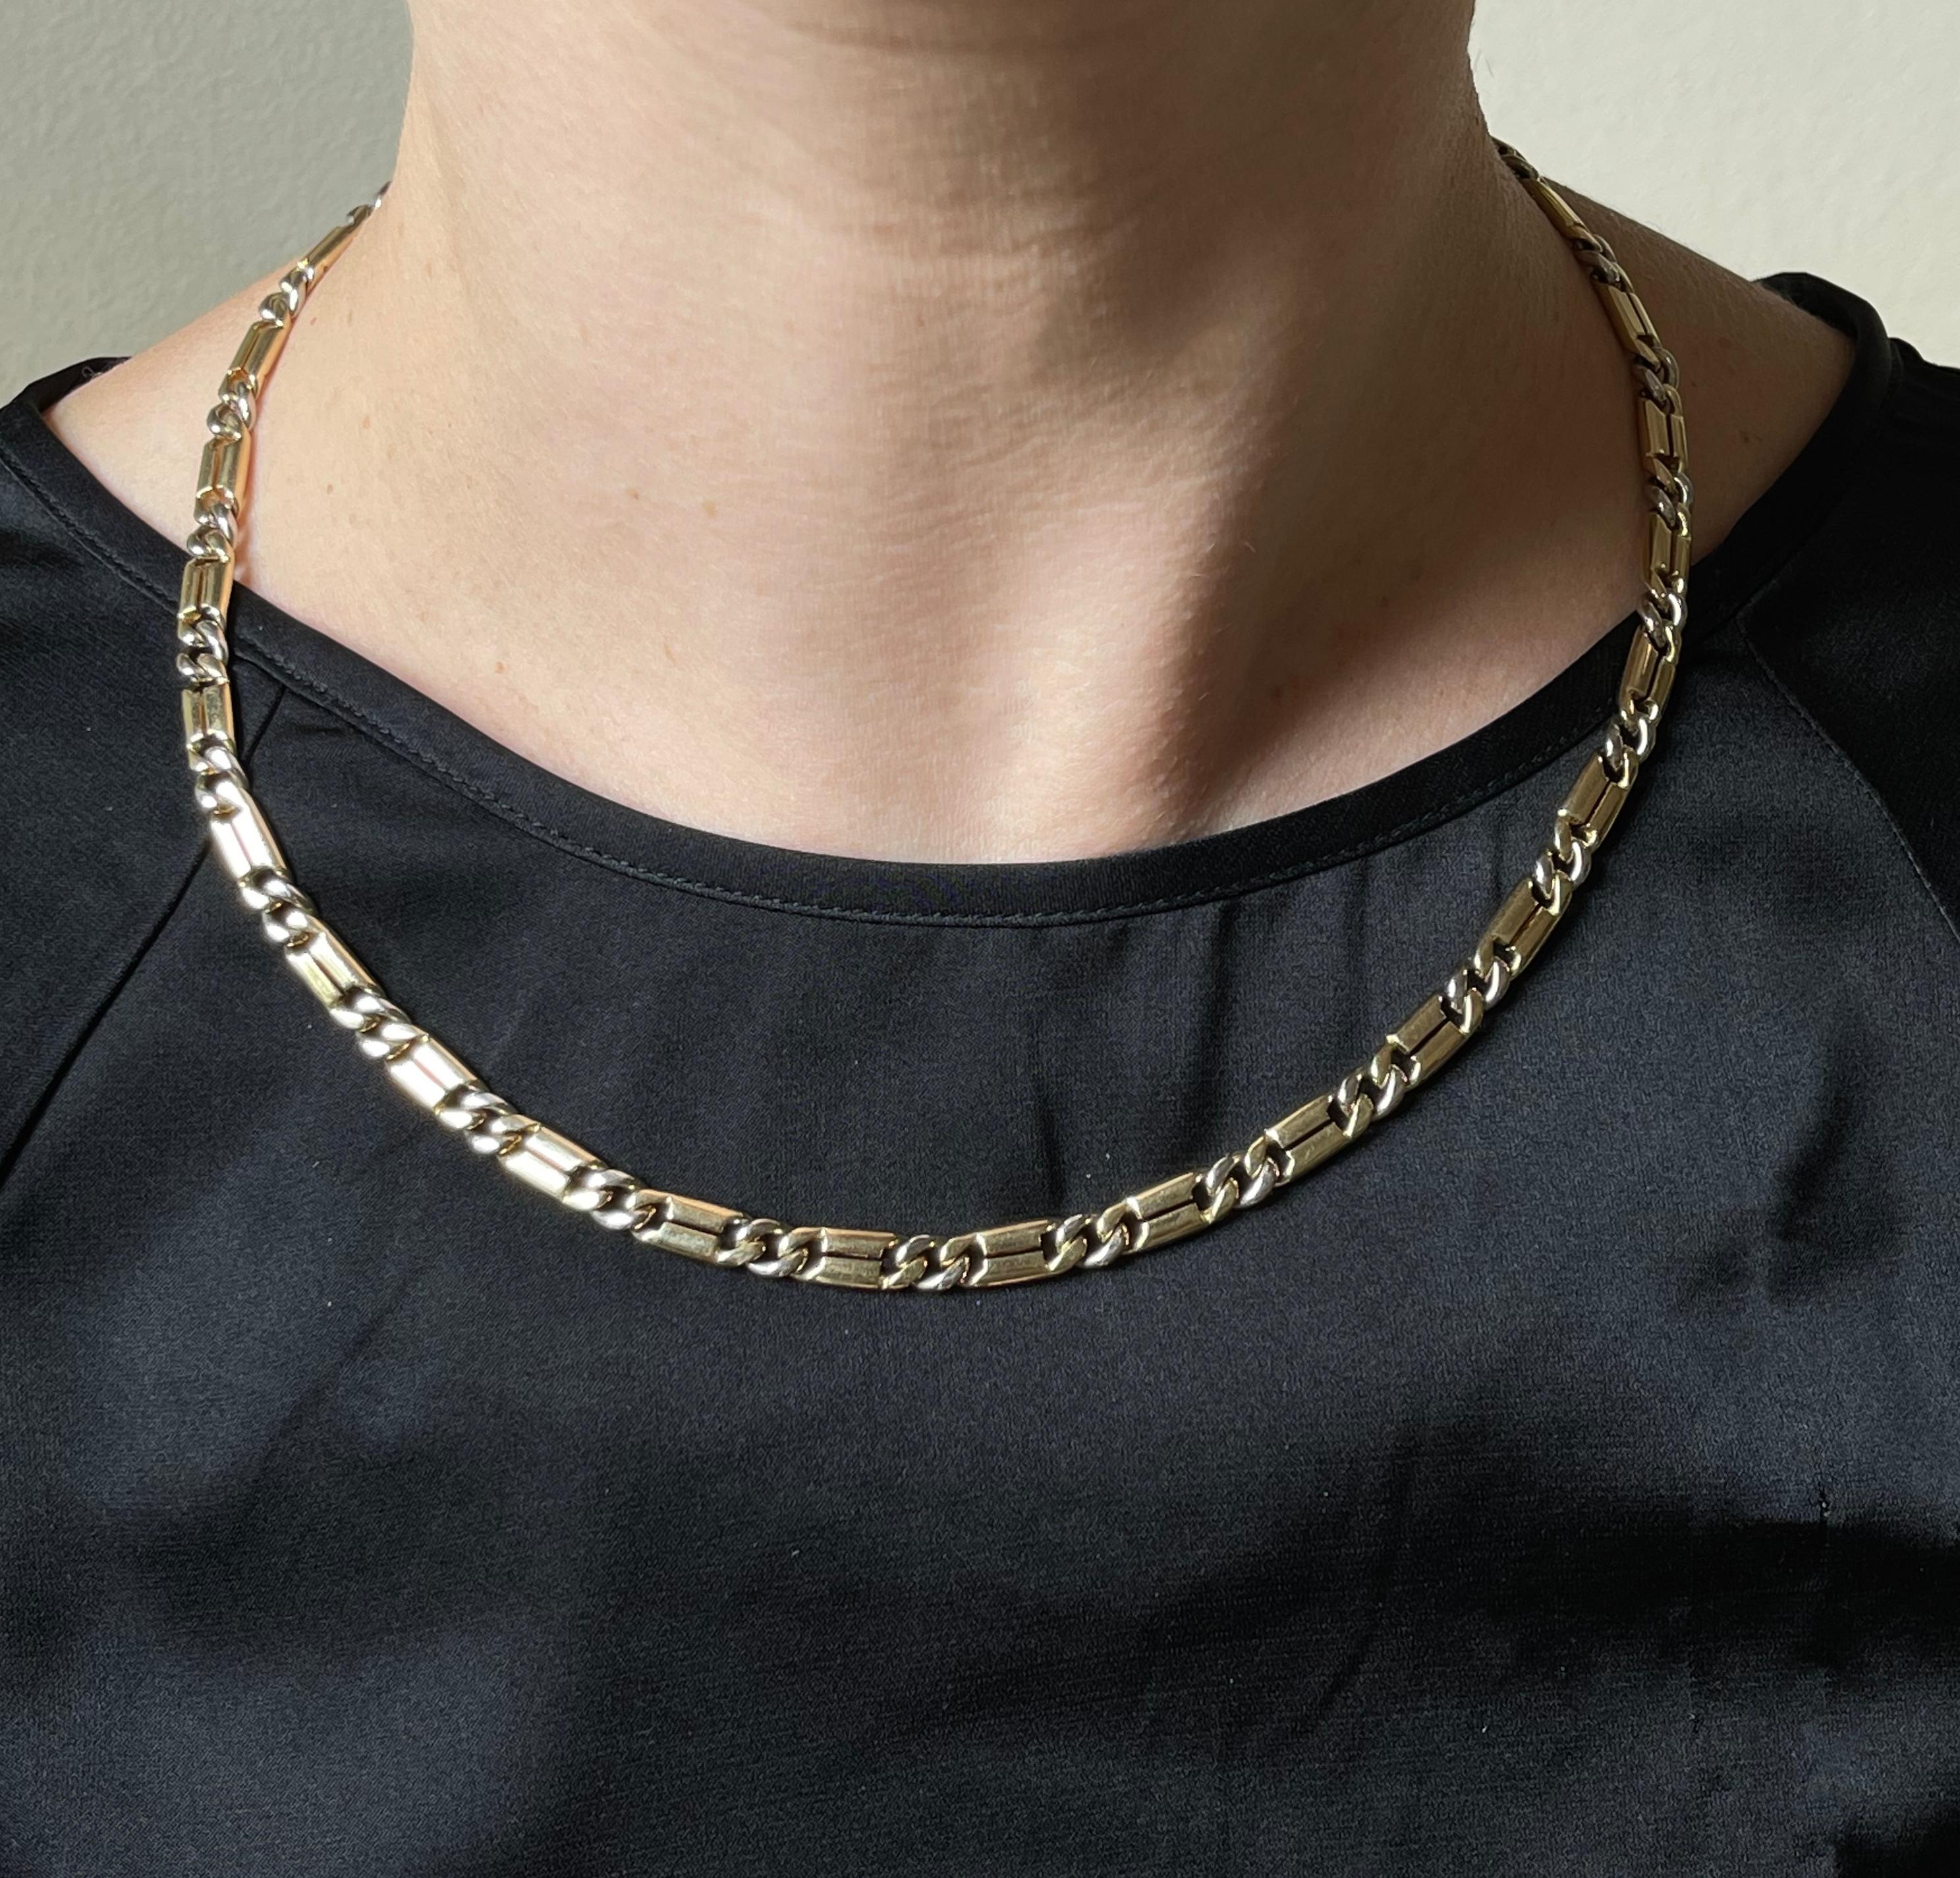 French made vintage 18k gold link chain. Necklace is 20